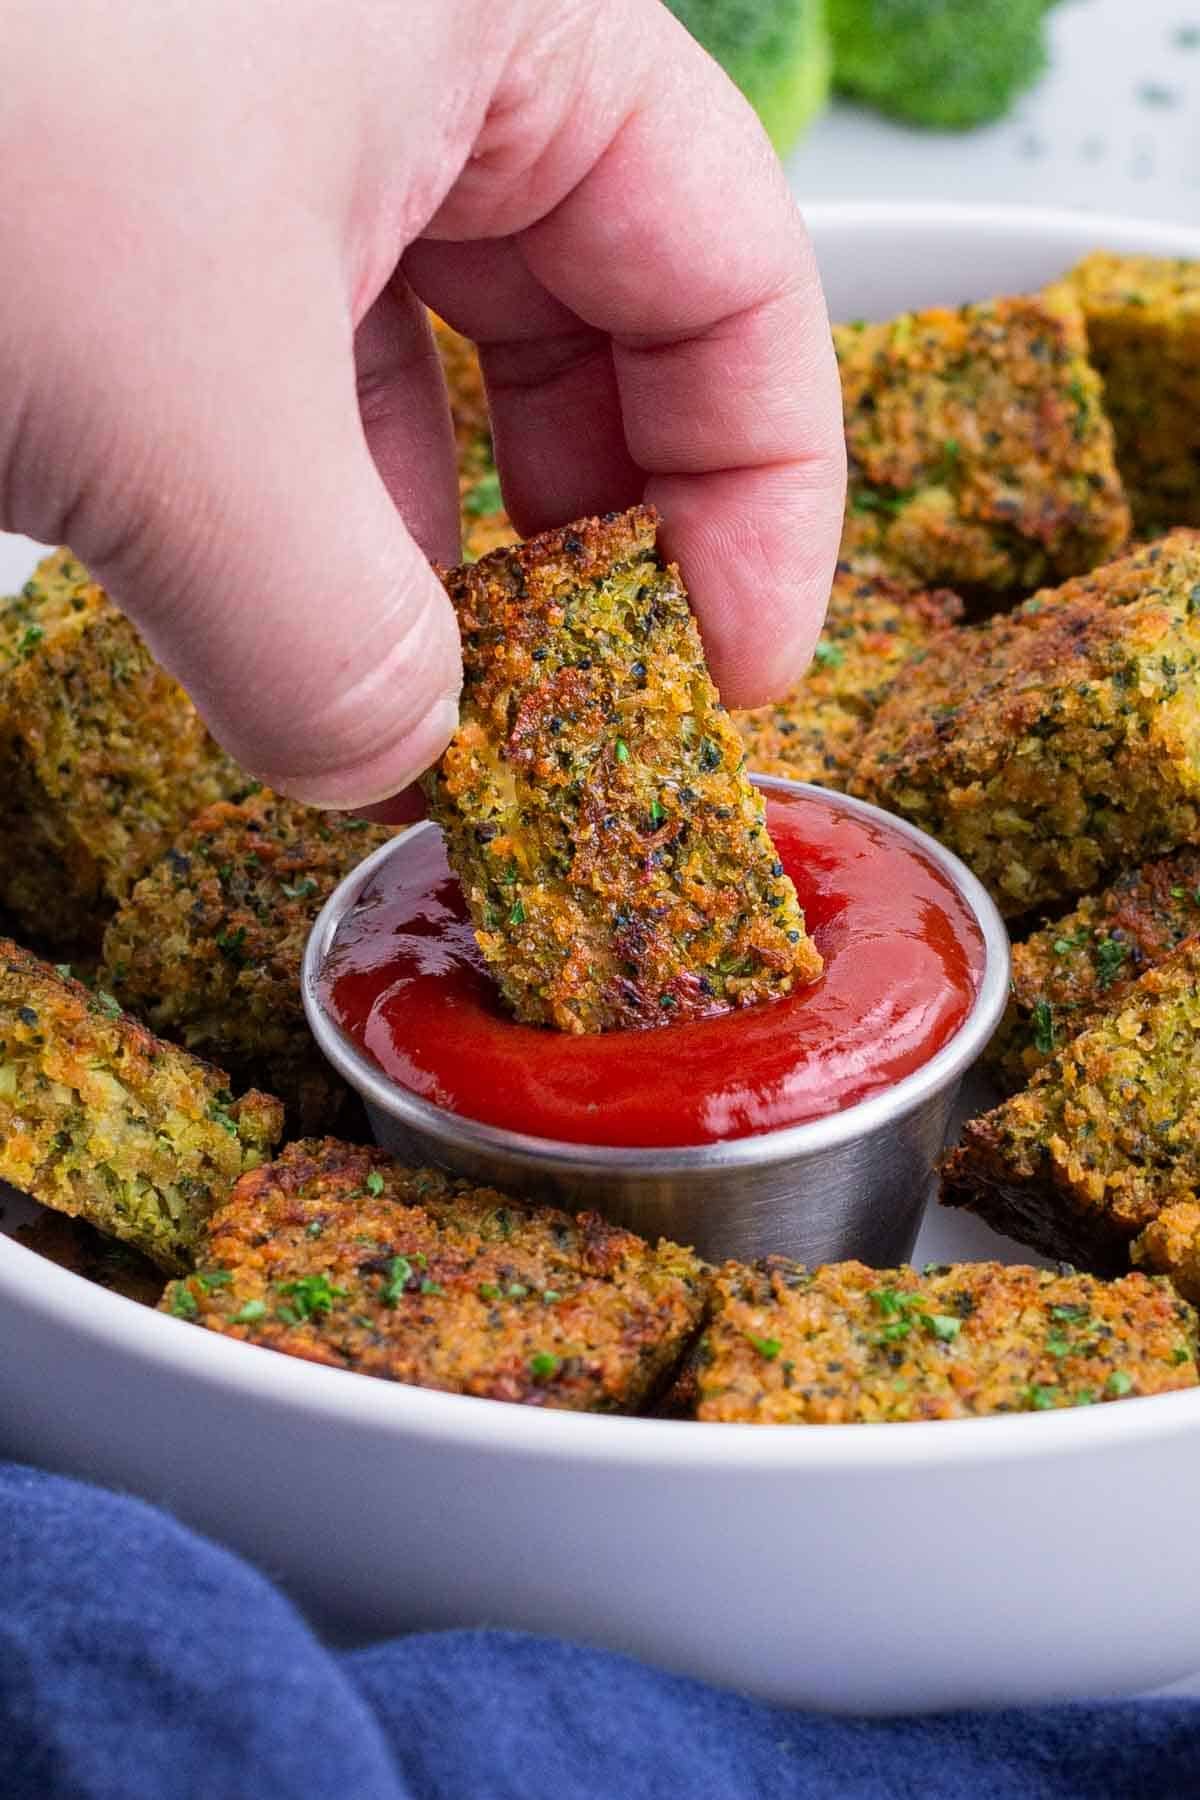 A hand dips a homemade broccoli tot into a bowl of ketchup.